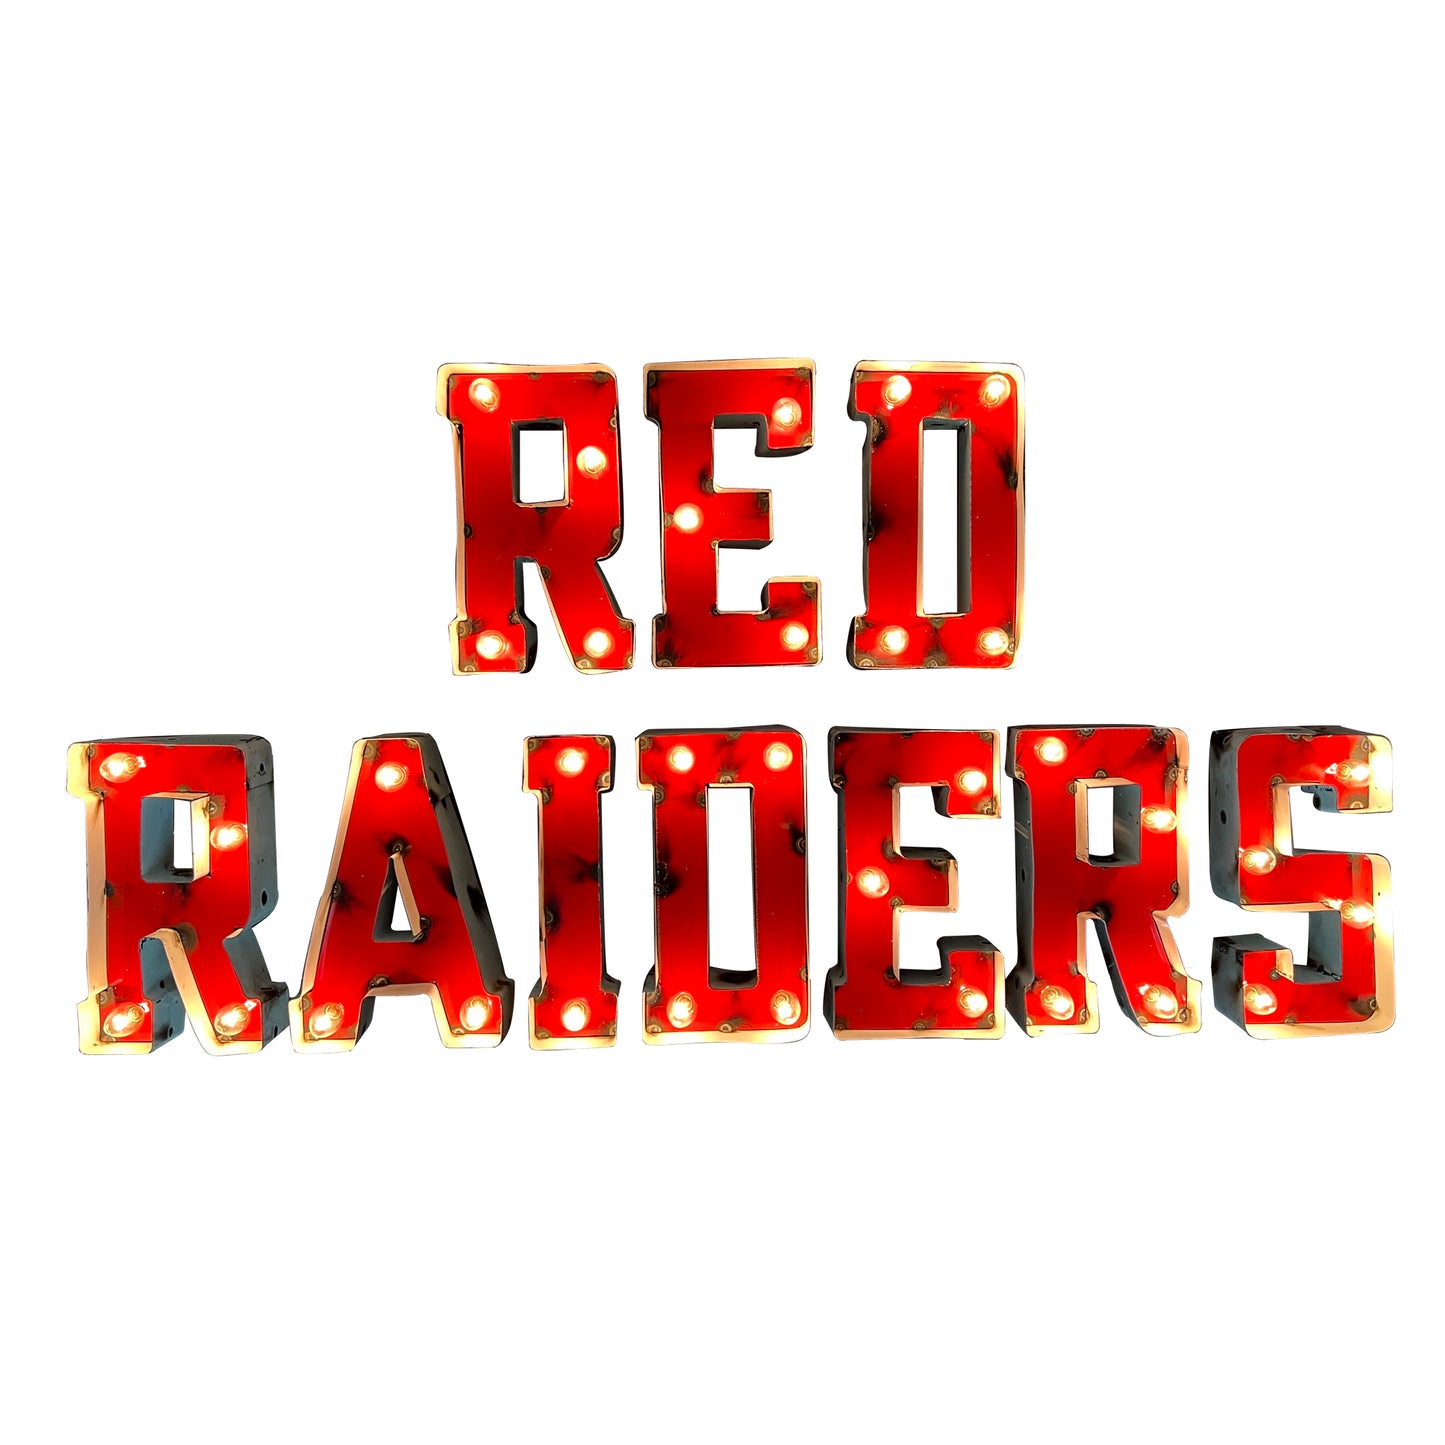 Texas Tech University "Red Raiders" Lighted Recycled Metal Wall Decor